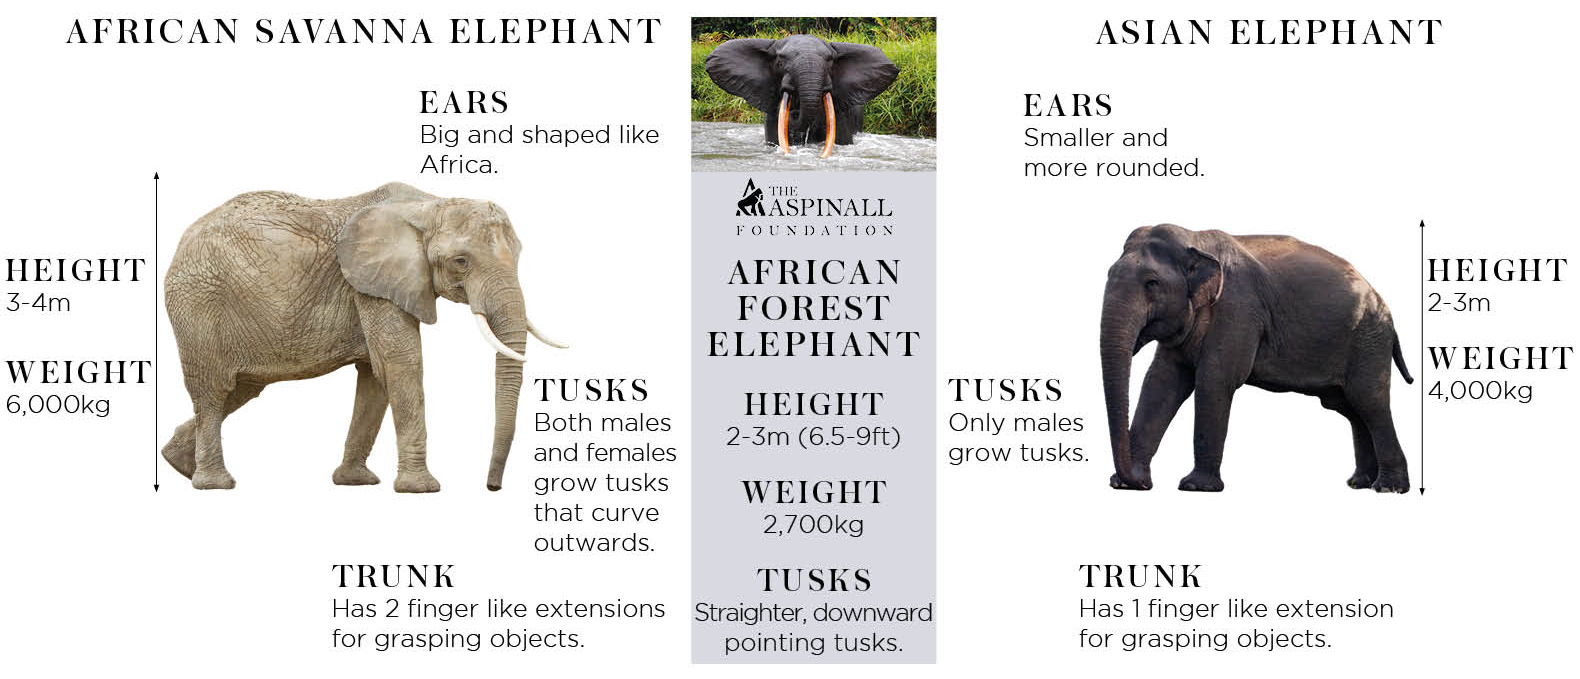 10 Fantastic Elephant Facts You'll Never Forget!